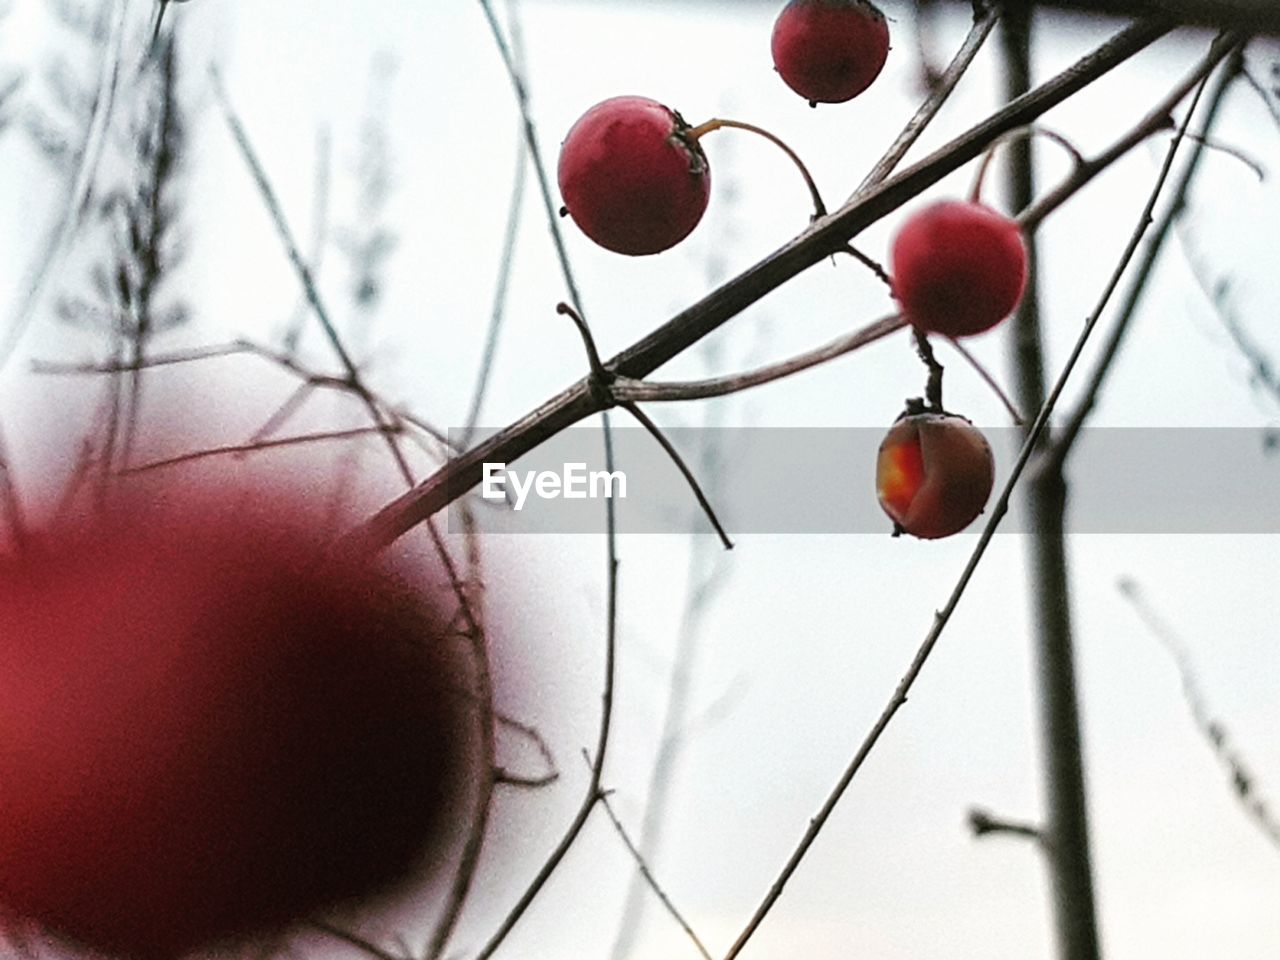 CLOSE-UP OF CHERRIES IN WINTER